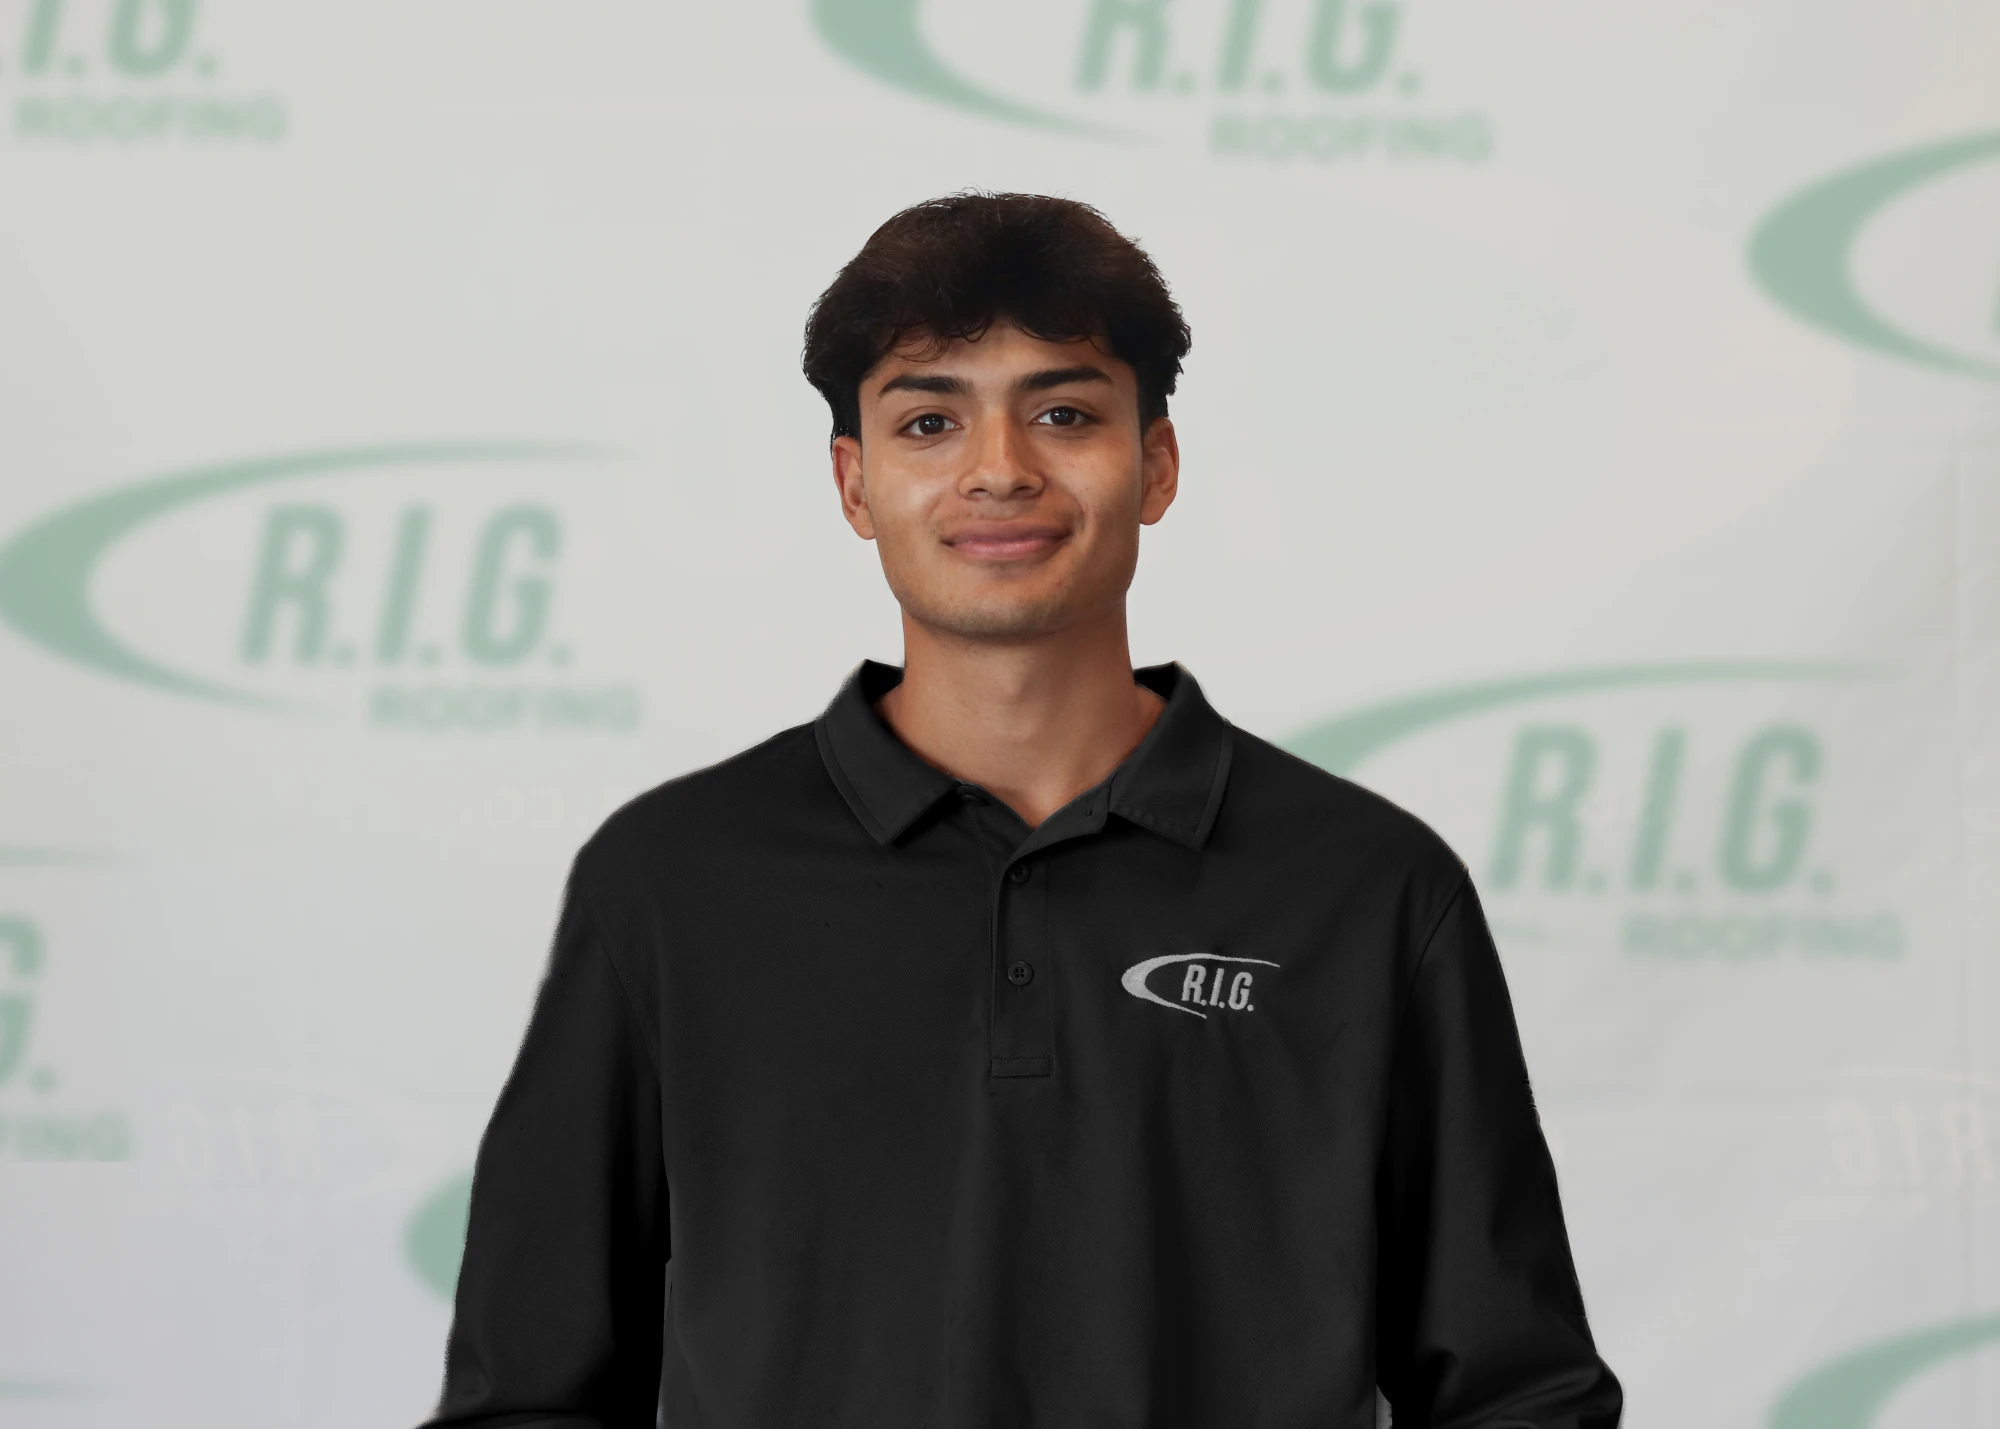 Image: RIG Roofing - Field Ops Team Member - Sito